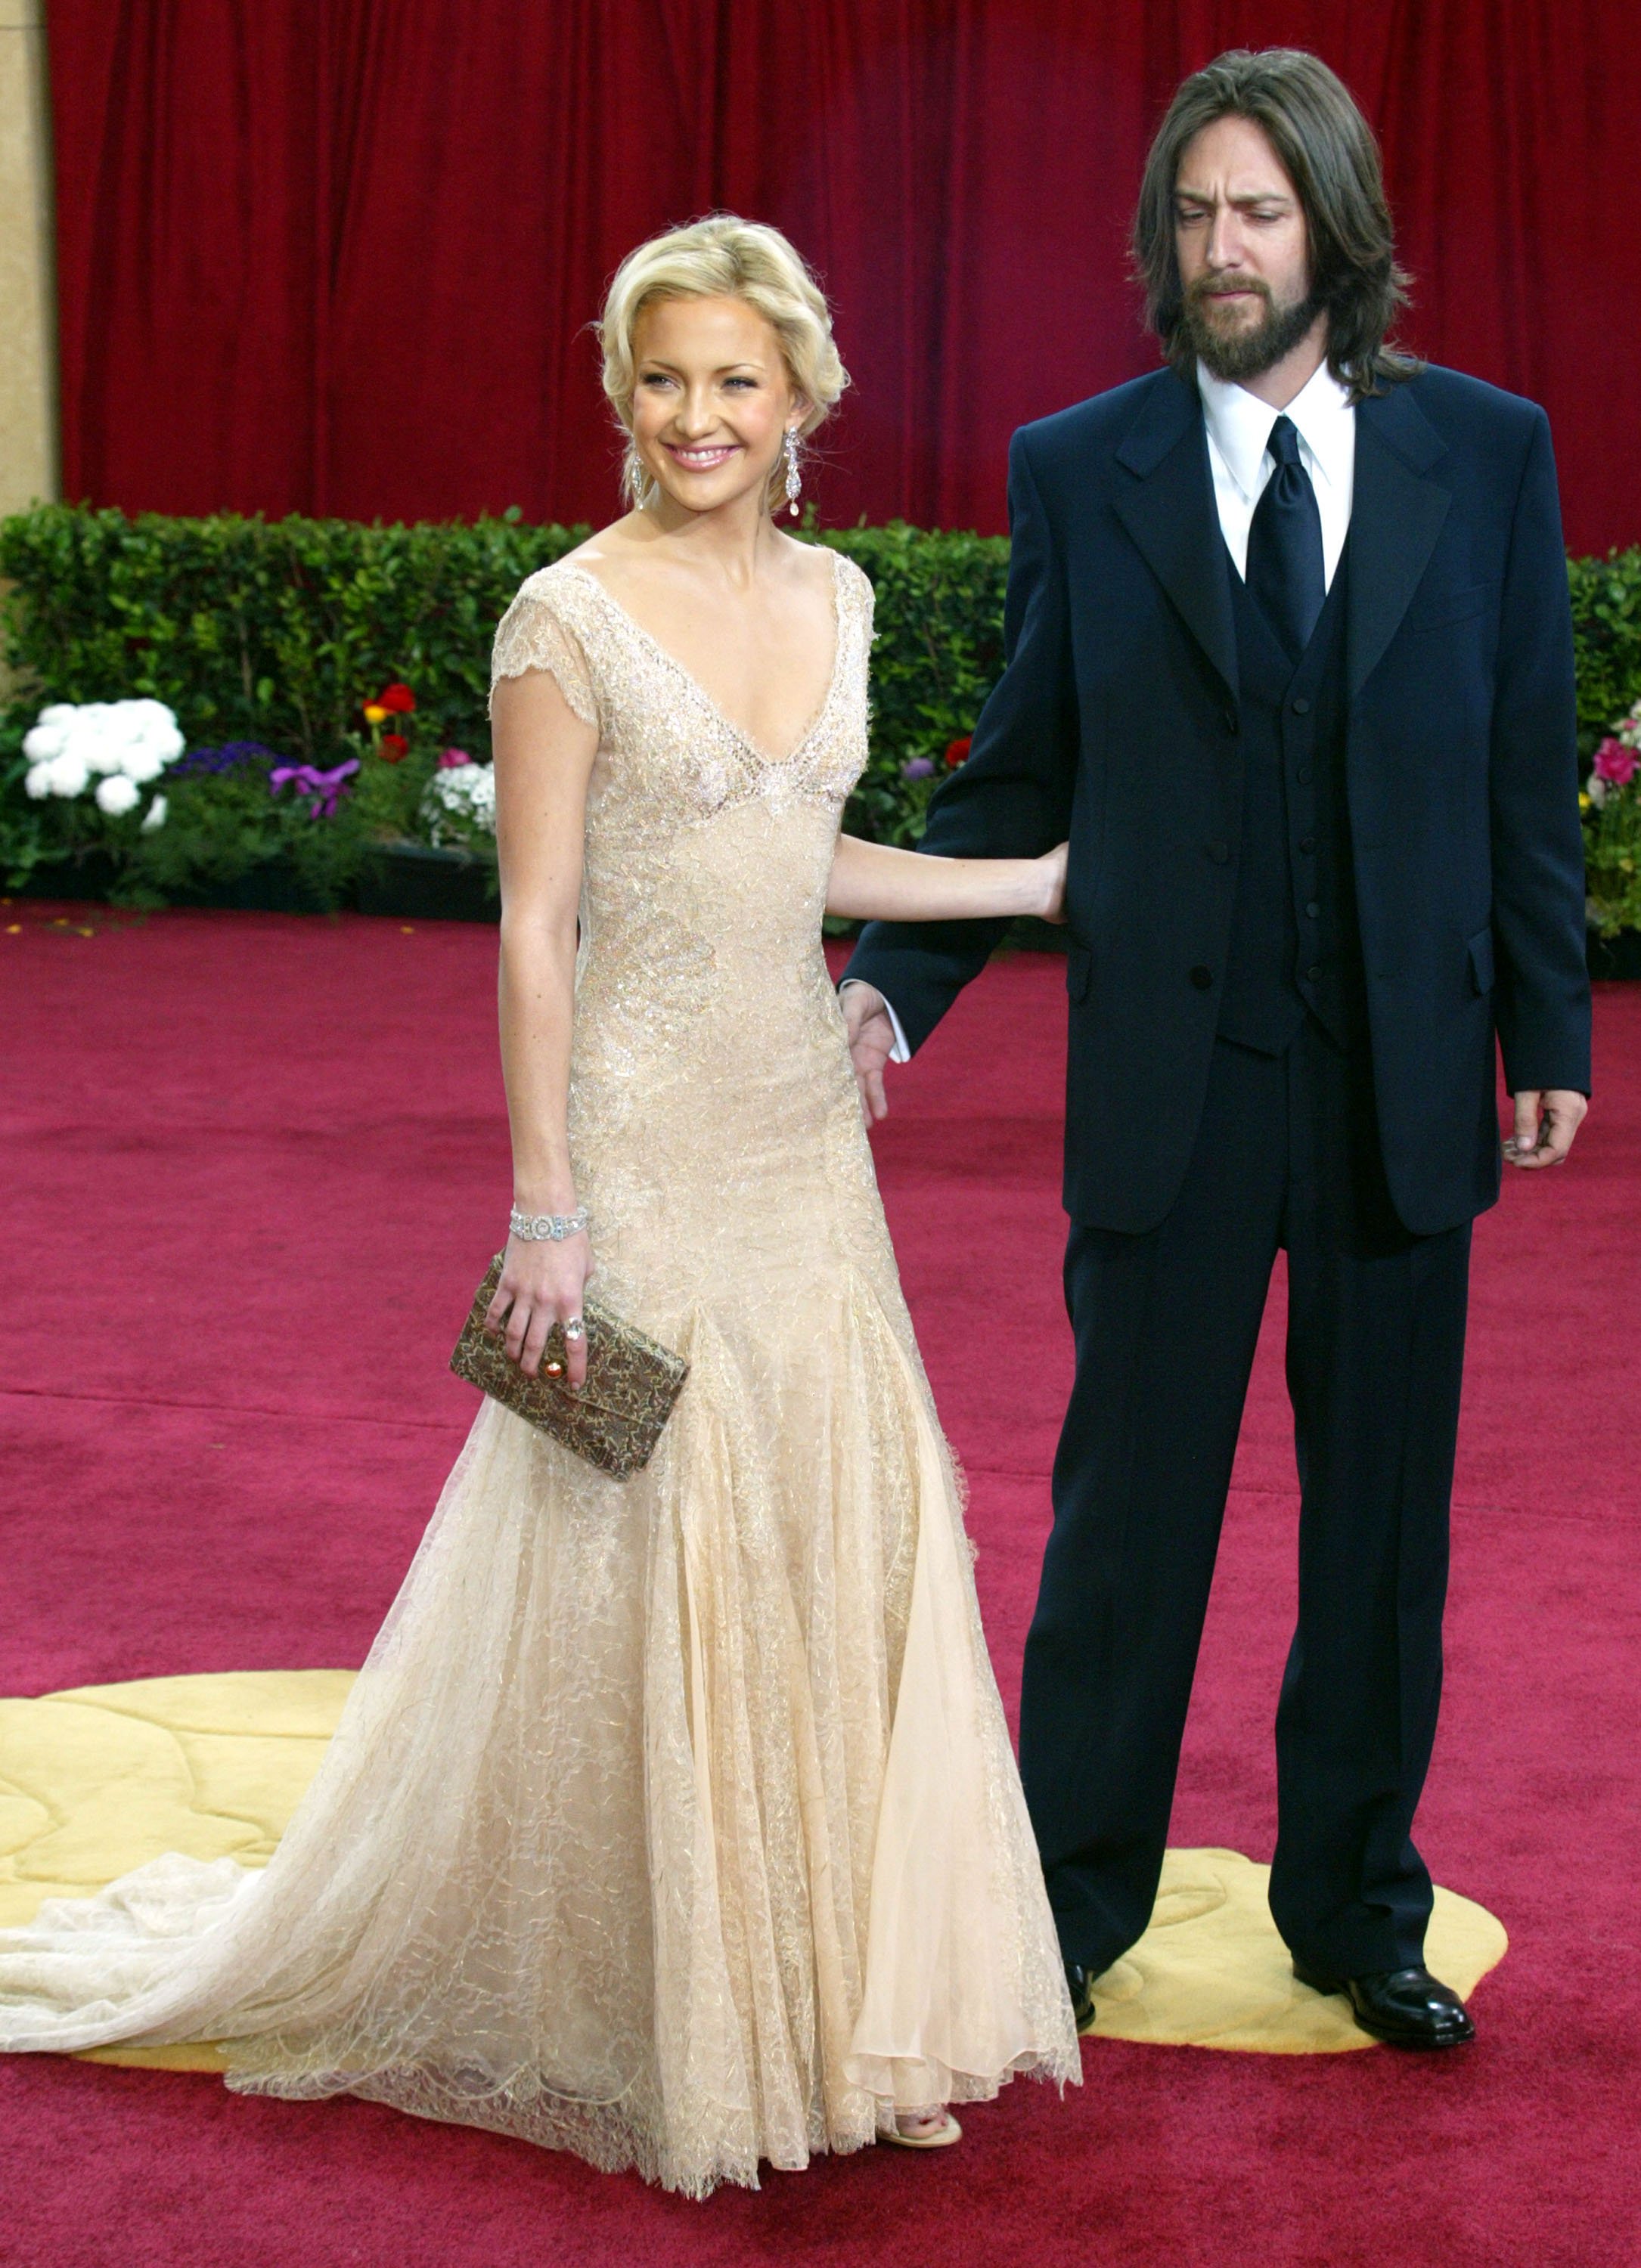 Kate Hudson and her husband Chris Robinson during The 75th Annual Academy Awards at The Kodak Theater in Hollywood, California. / Source: Getty Images